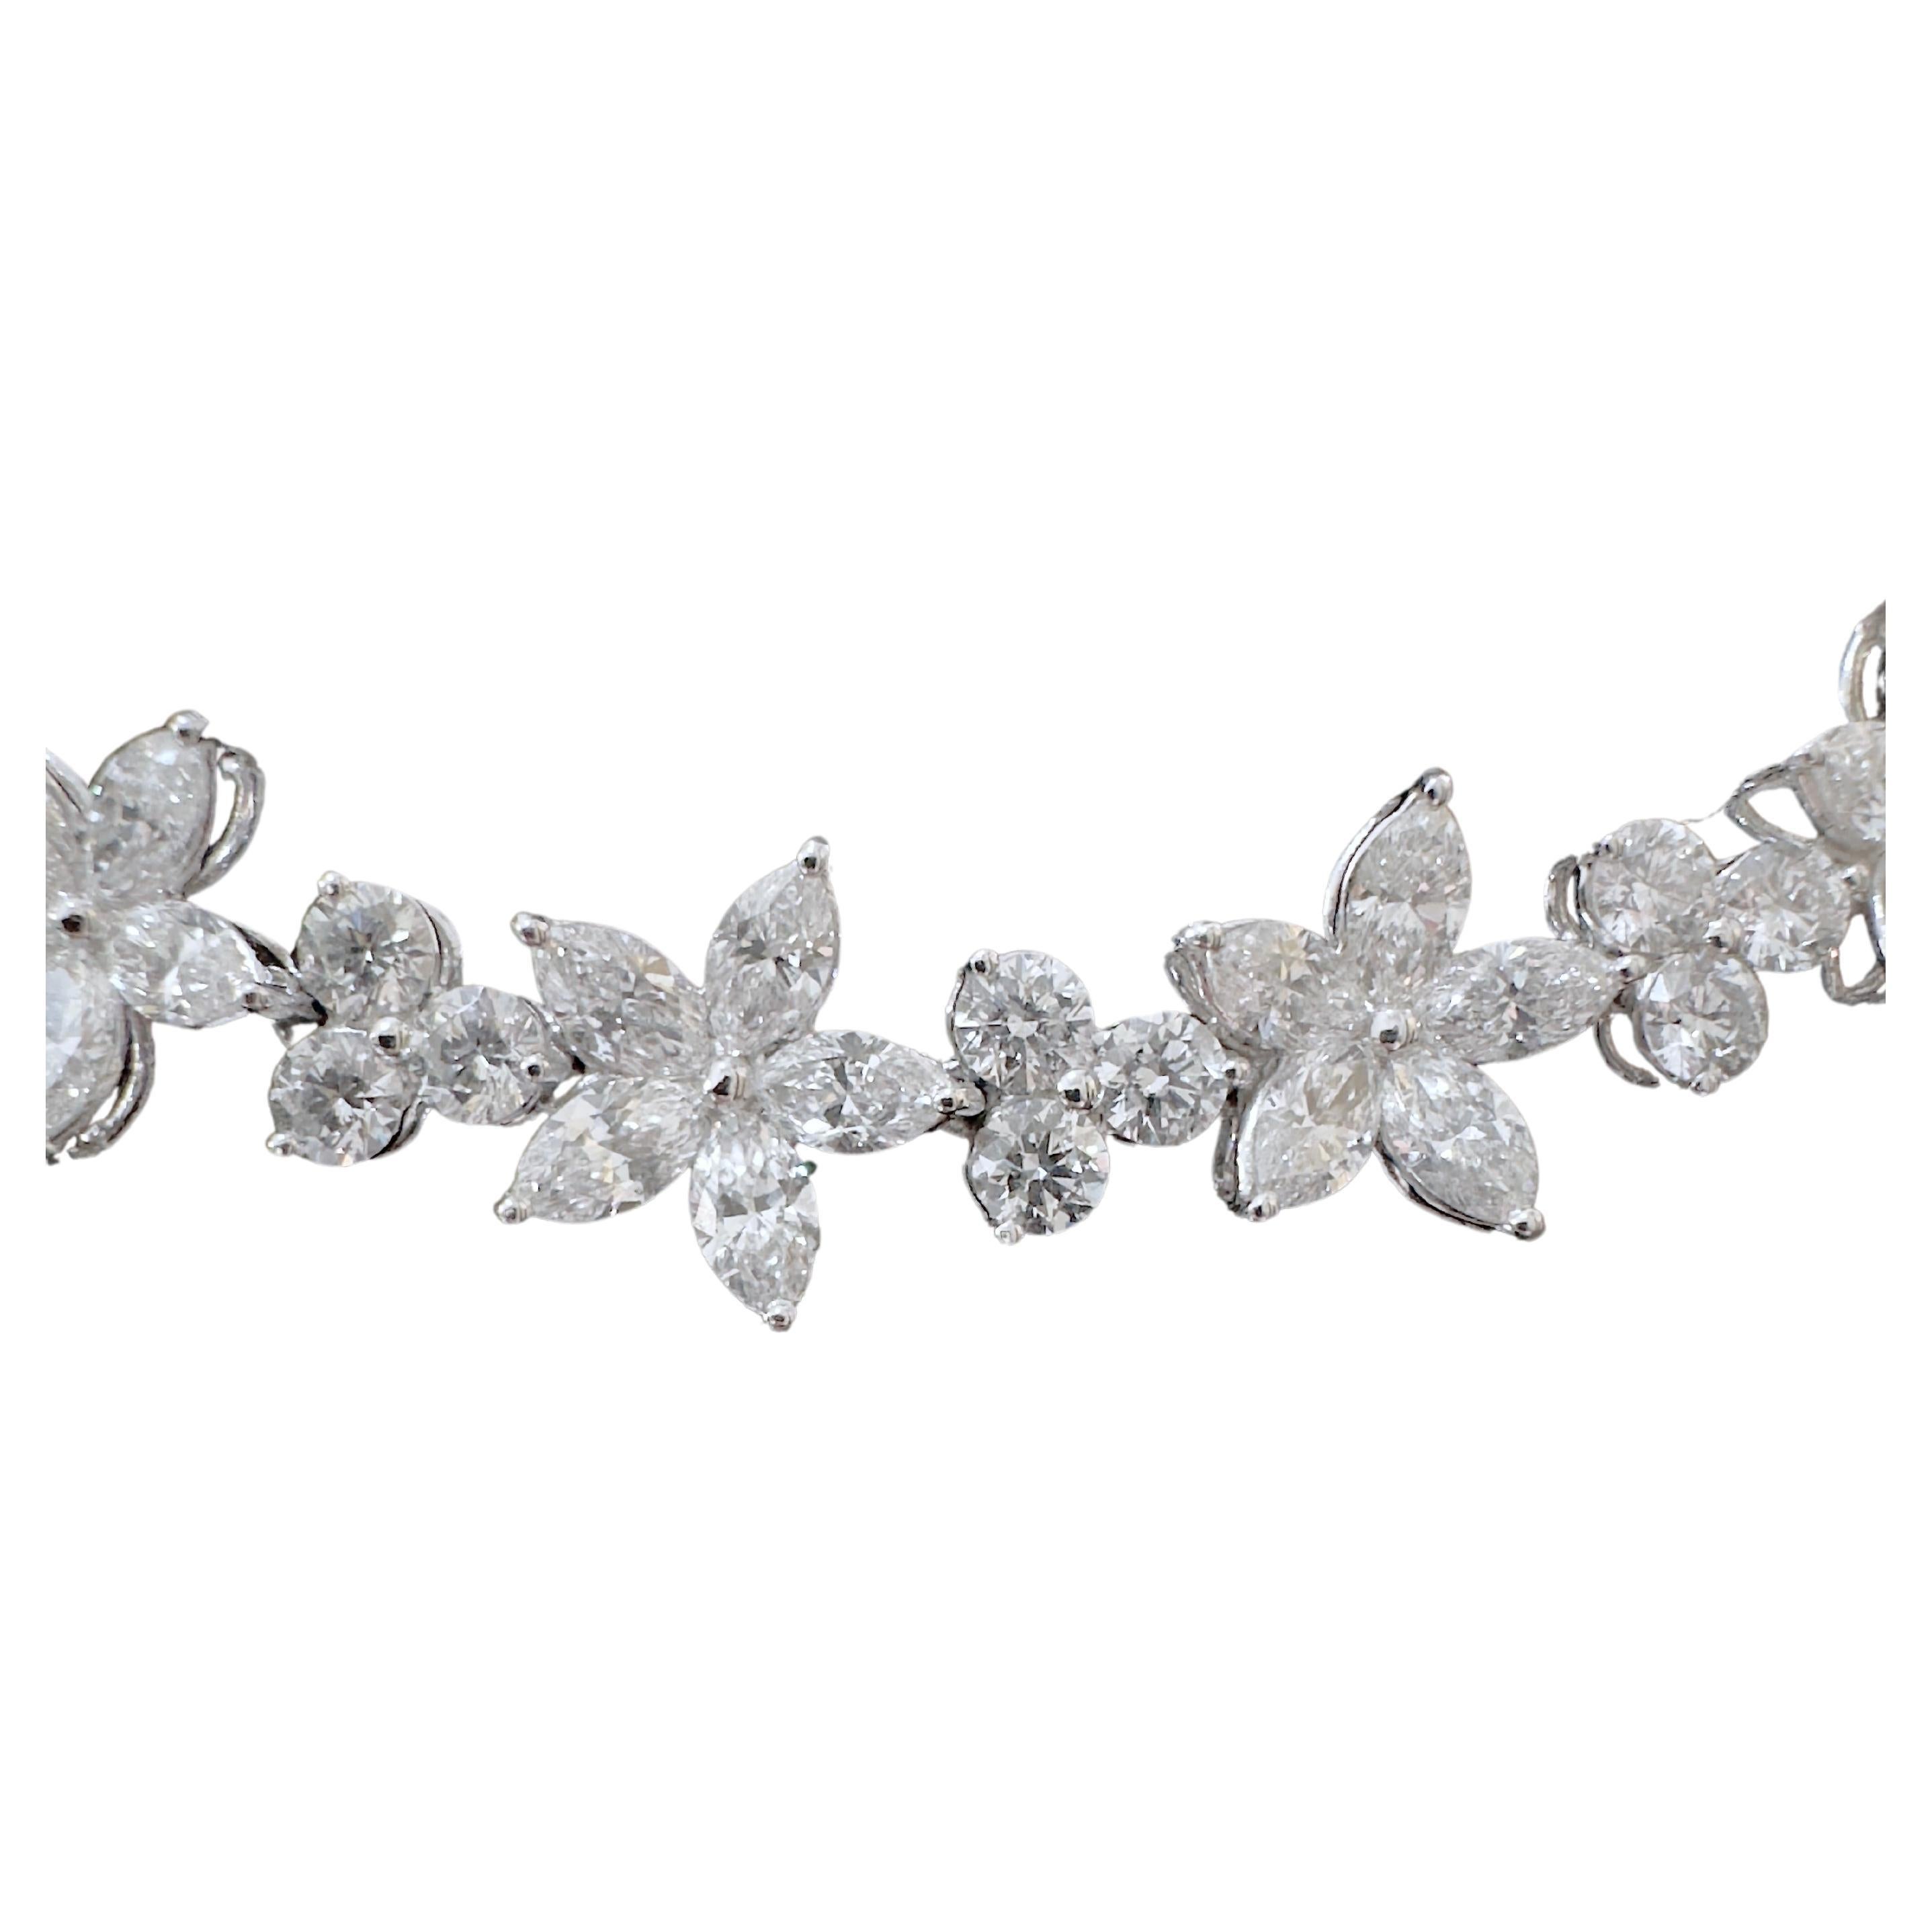 This magnificent wreath style necklace is an absolute must have for every jewelry collector and lover.  It is timeless iconic and elegant that will captivate everyone's attention.  Set in 18k White Gold, the marquise diamond are arranged in a star